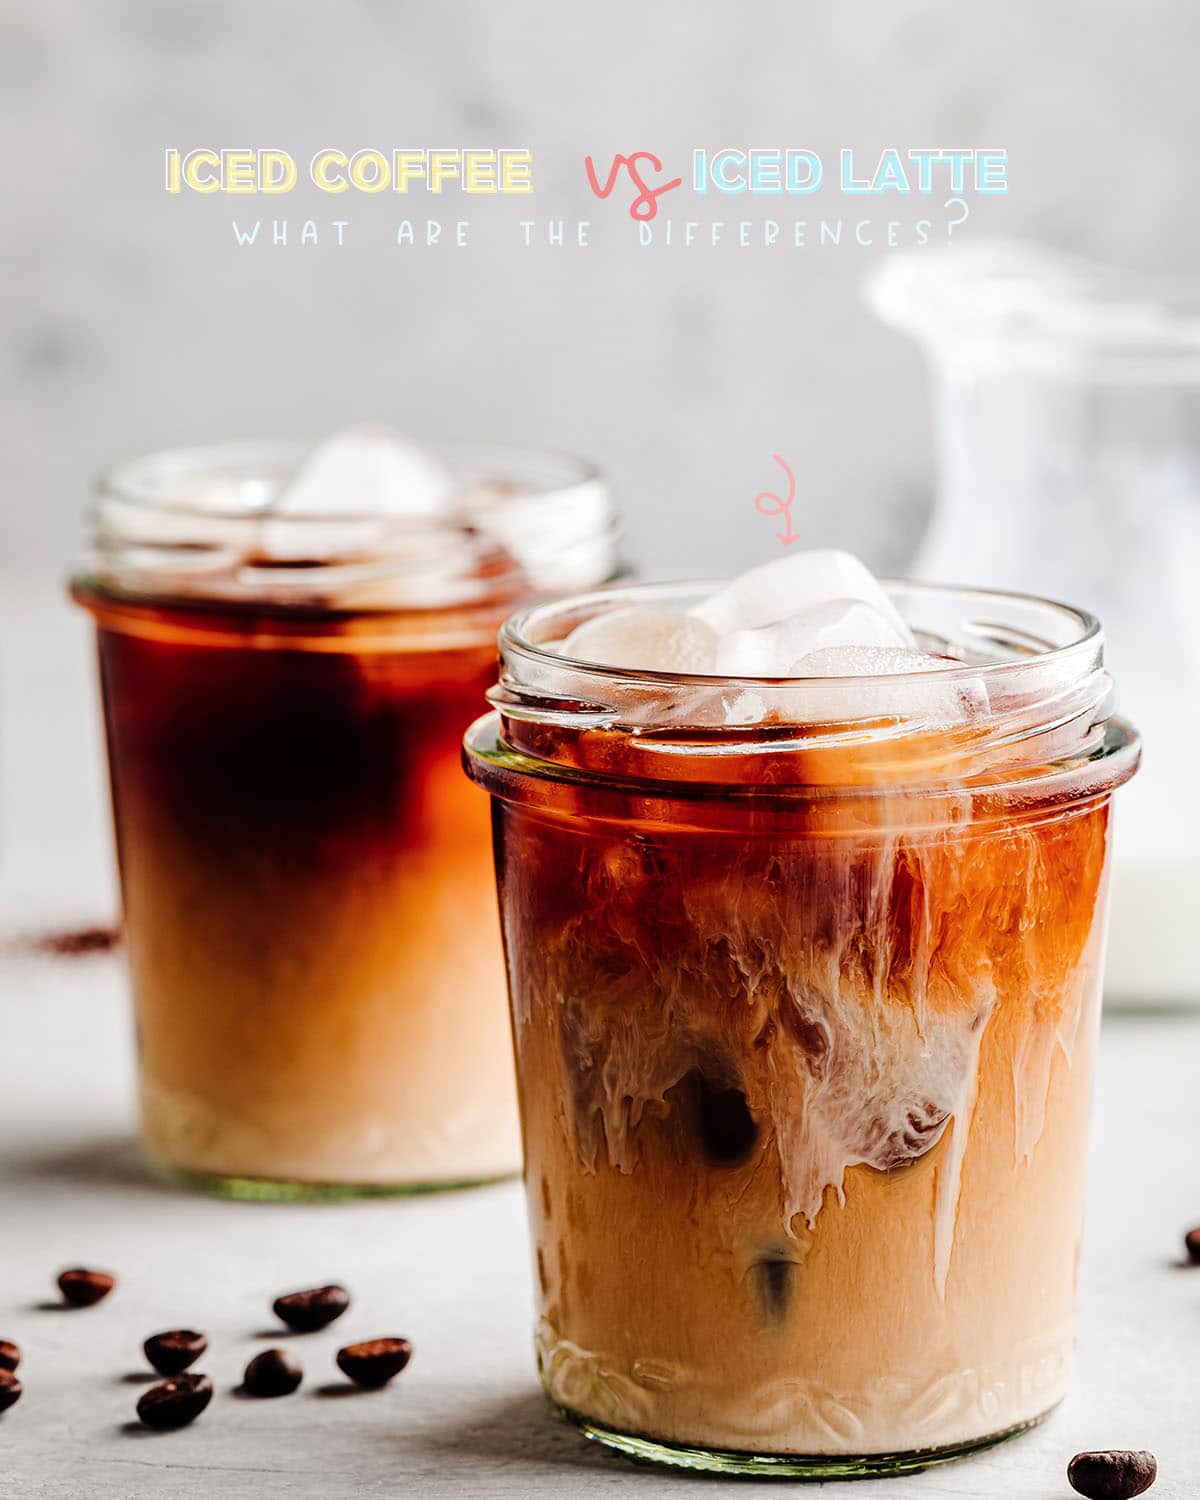 Do you know the difference between iced coffee vs iced latte? Many people think they’re the same thing; however, there are some important differences between them.